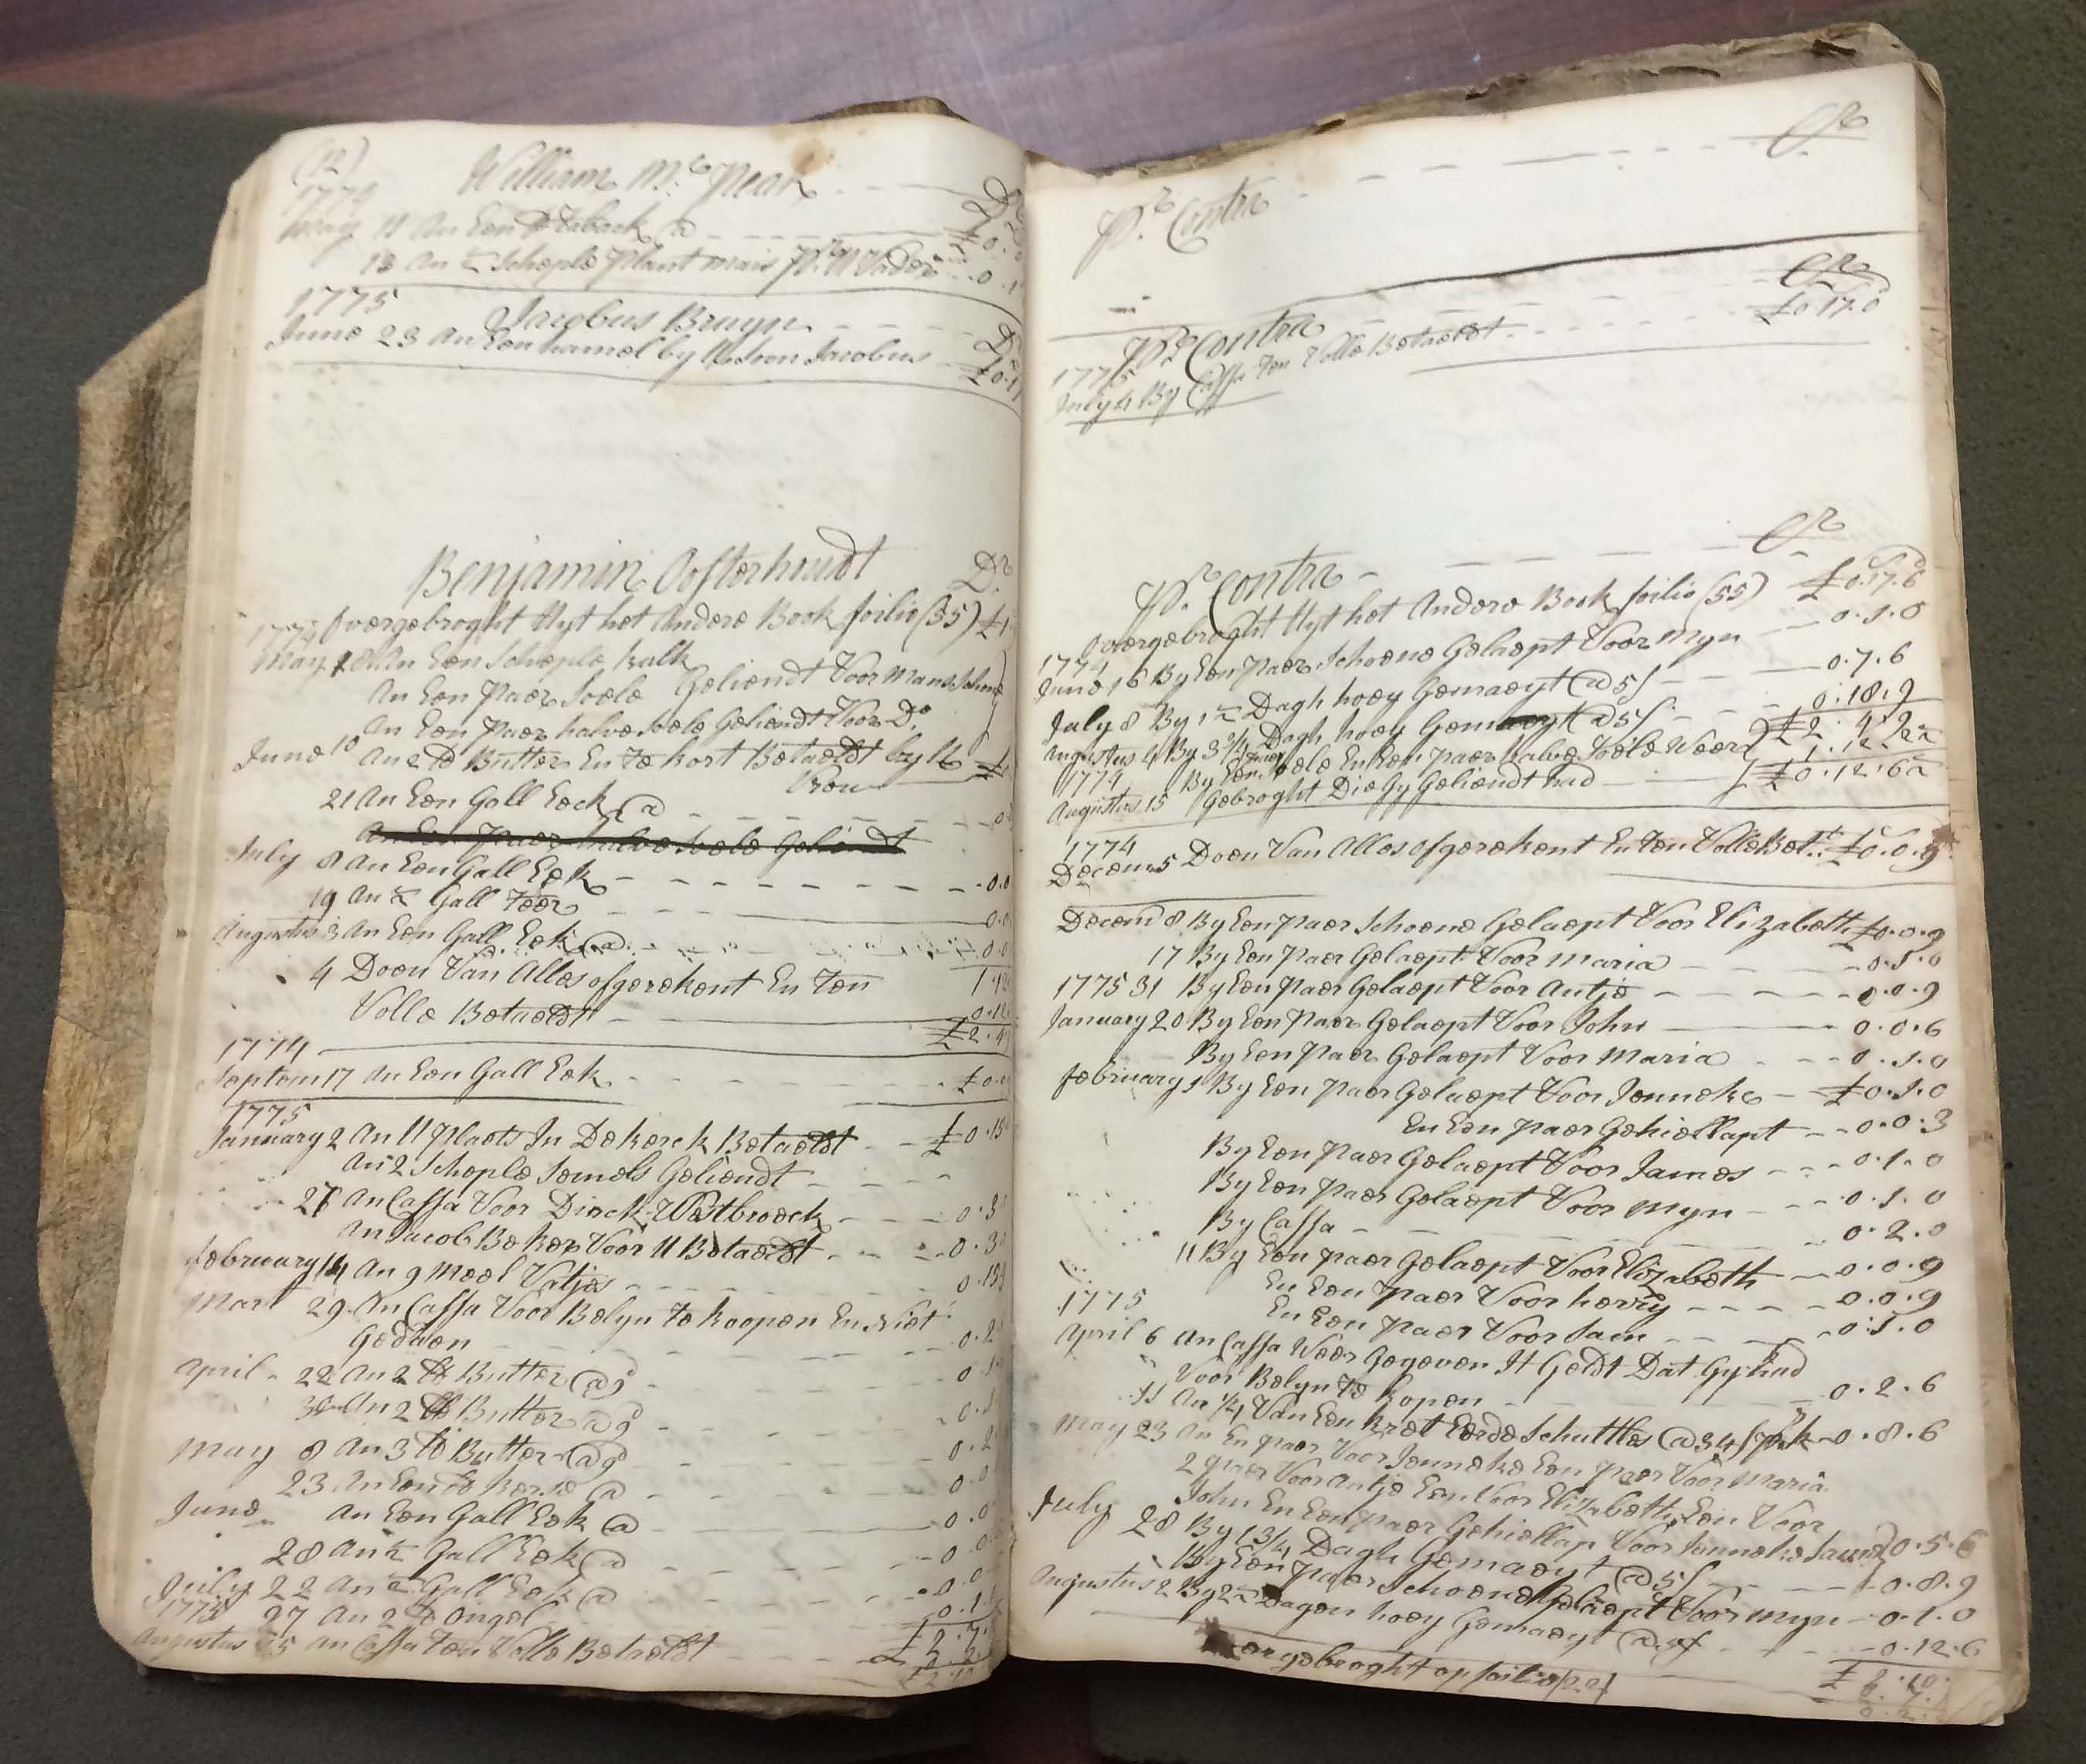 Farm ledger opened for Benjamin Oosterhoudt, shoe maker, showing debited entries on left and credited entries on right